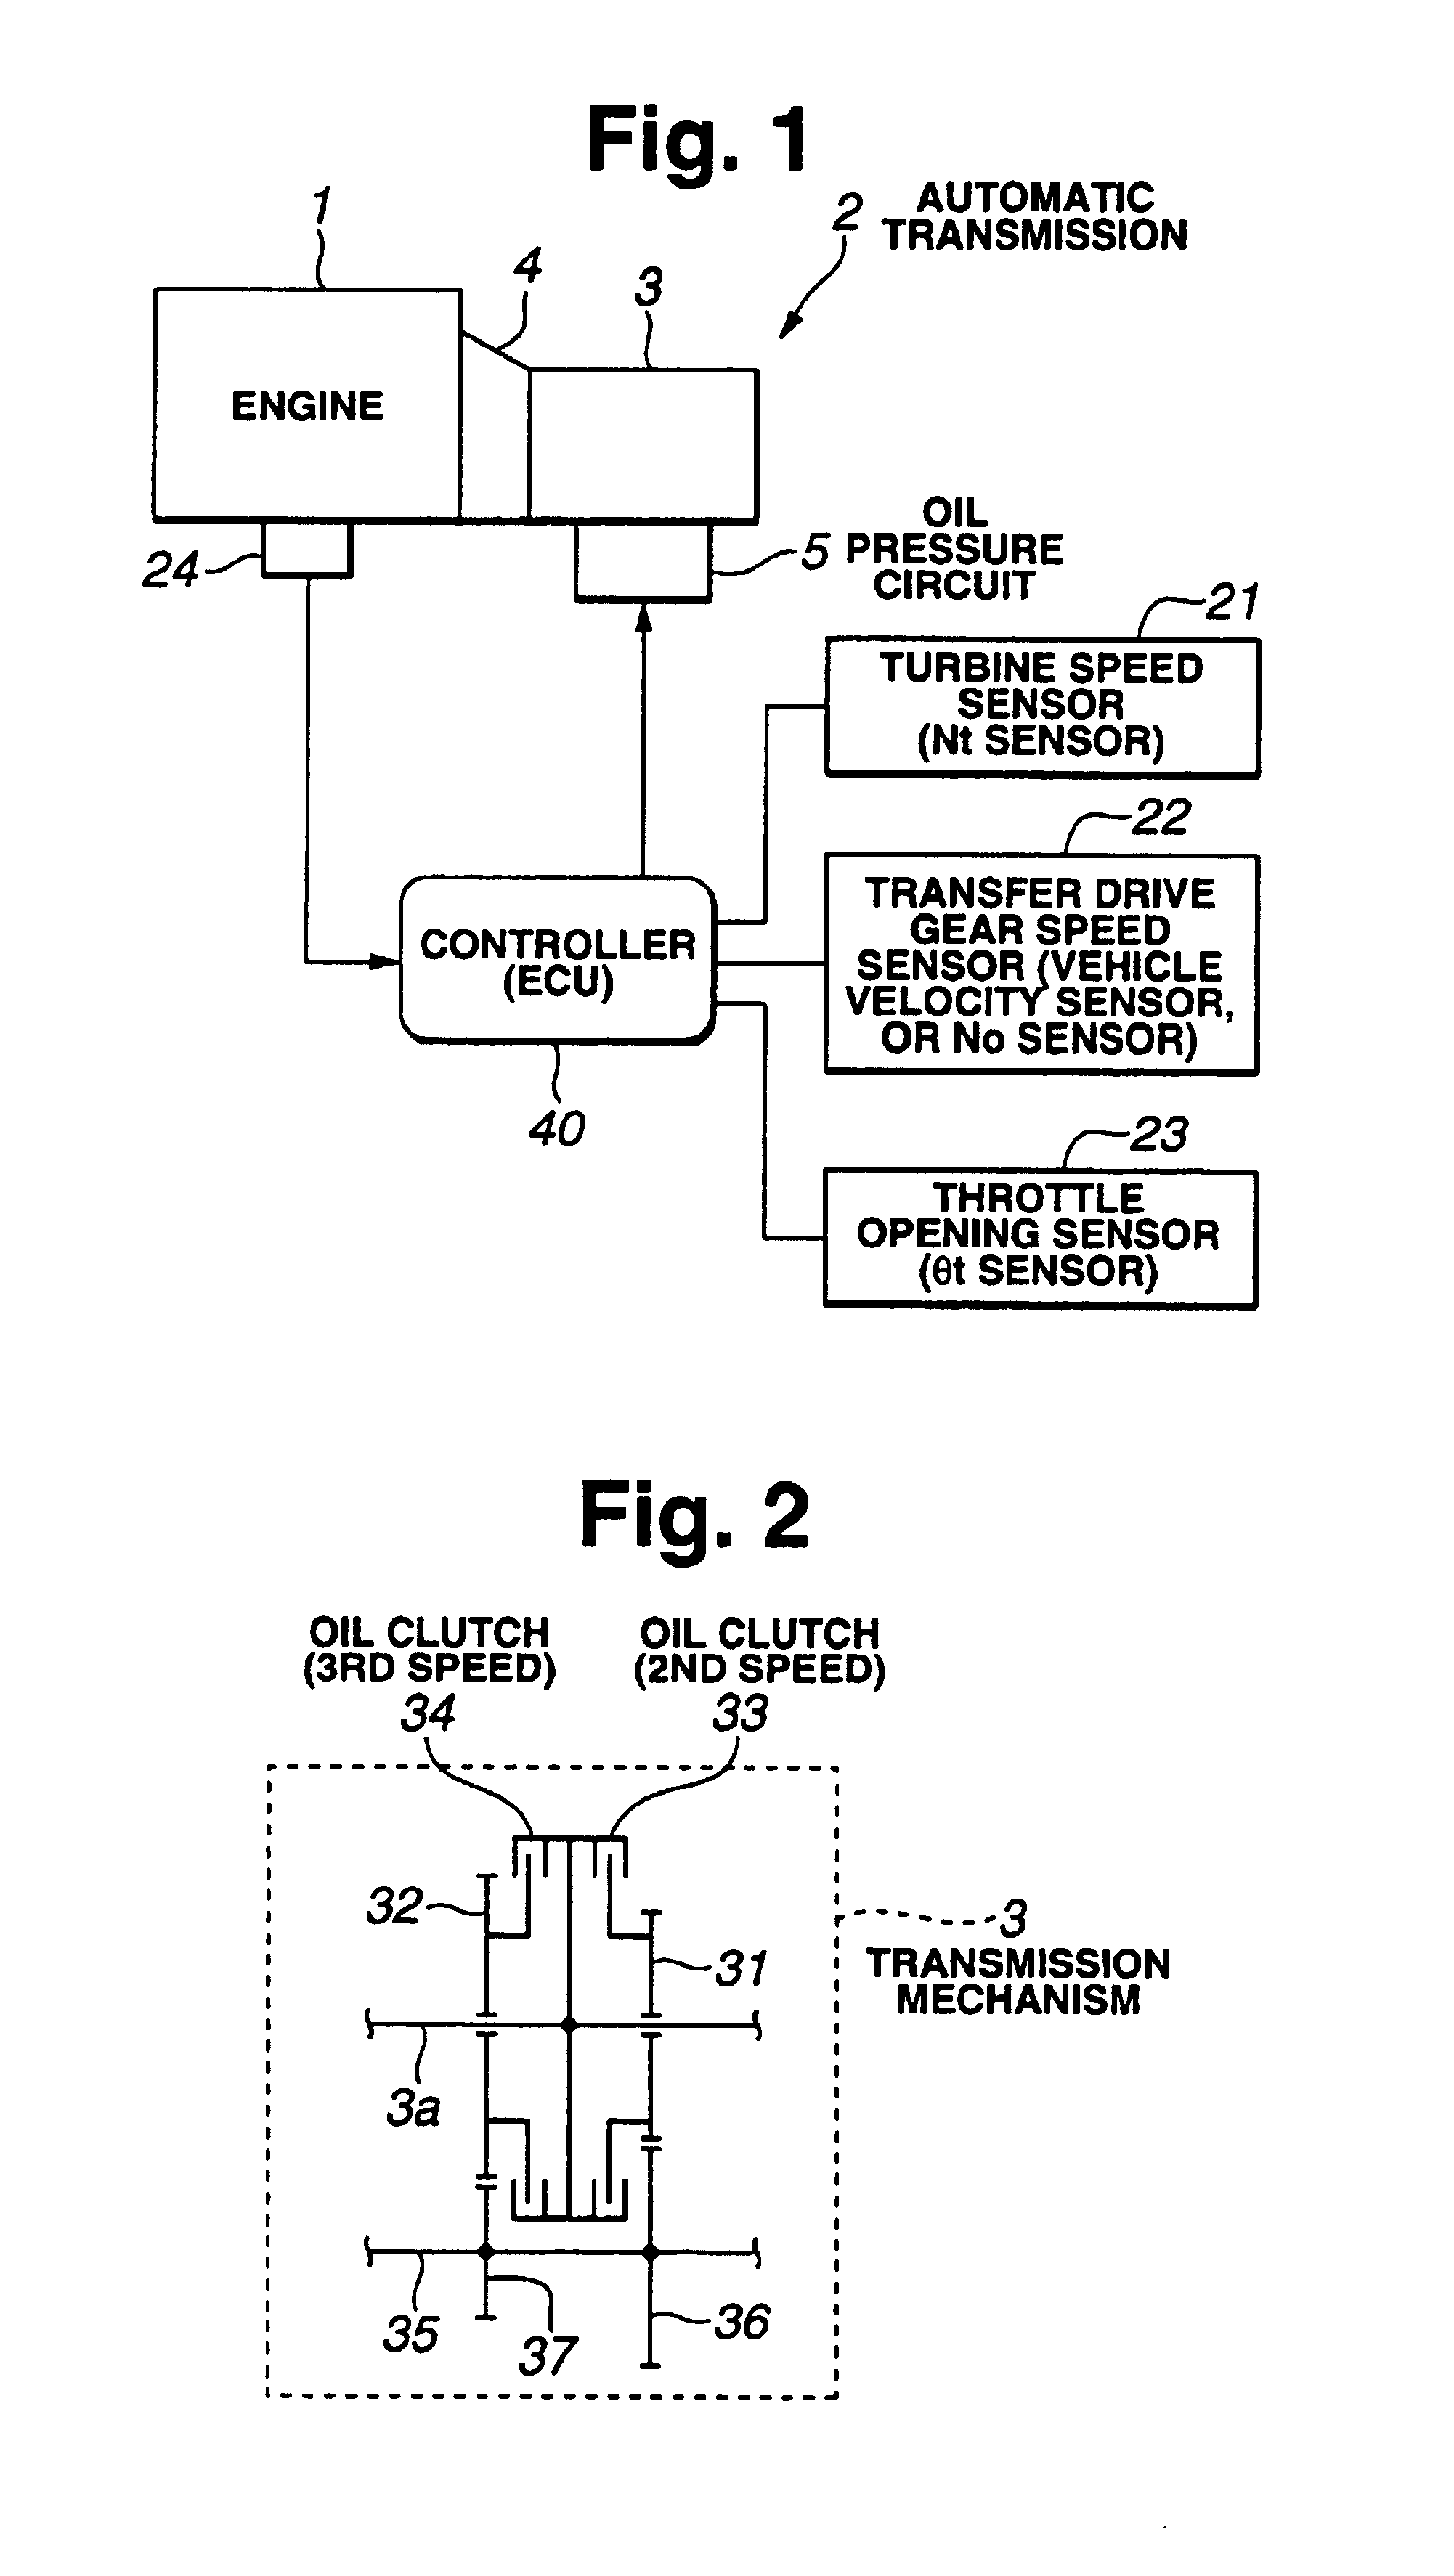 Transmission control system of automatic transmission for vehicle